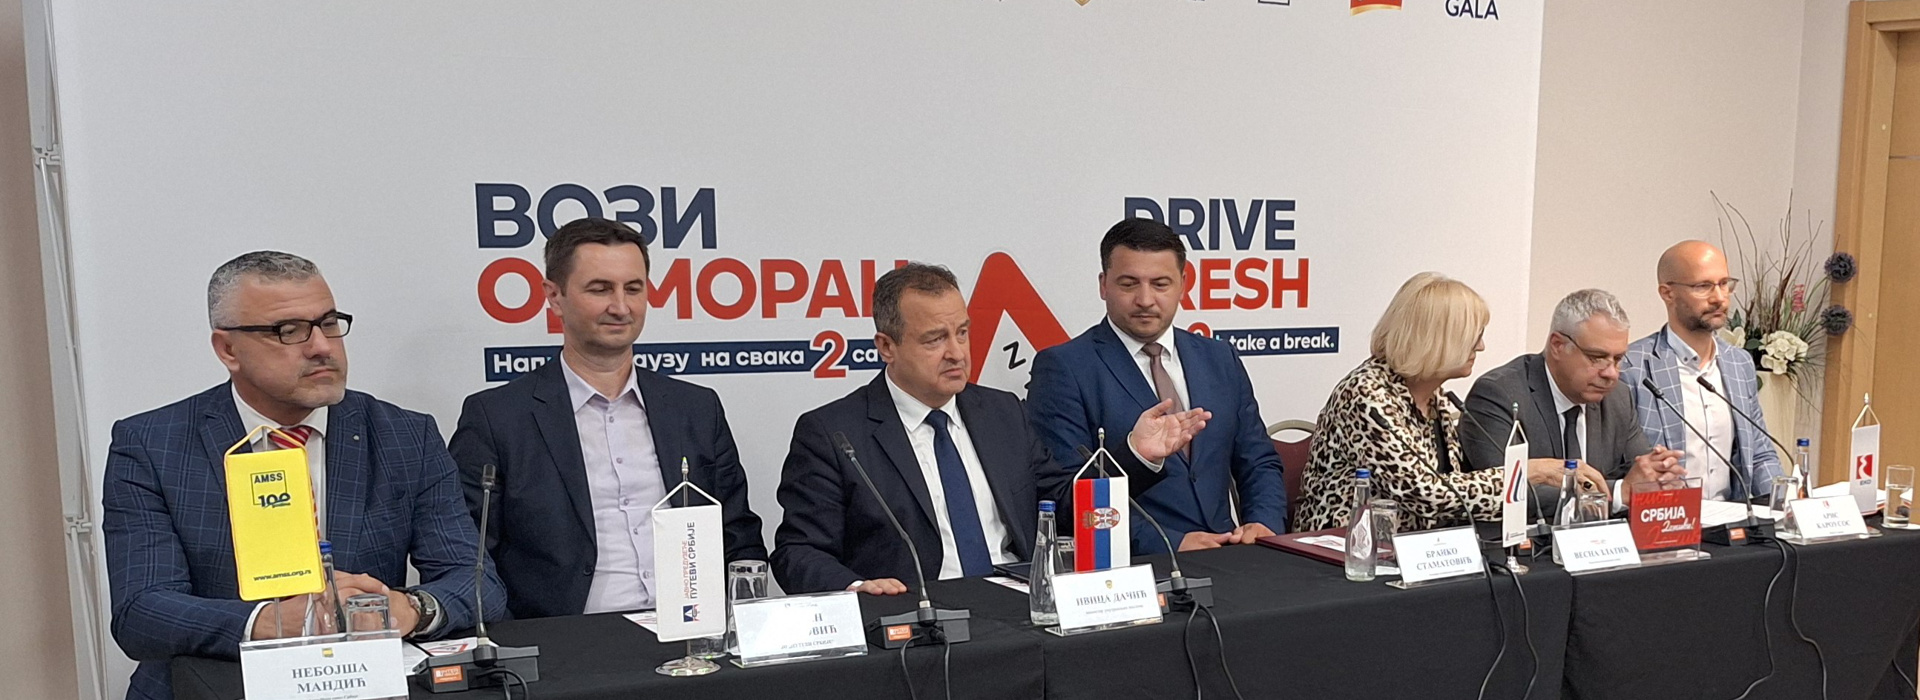 The joint press conference marked the beginning of the campaign "Drive Fresh"